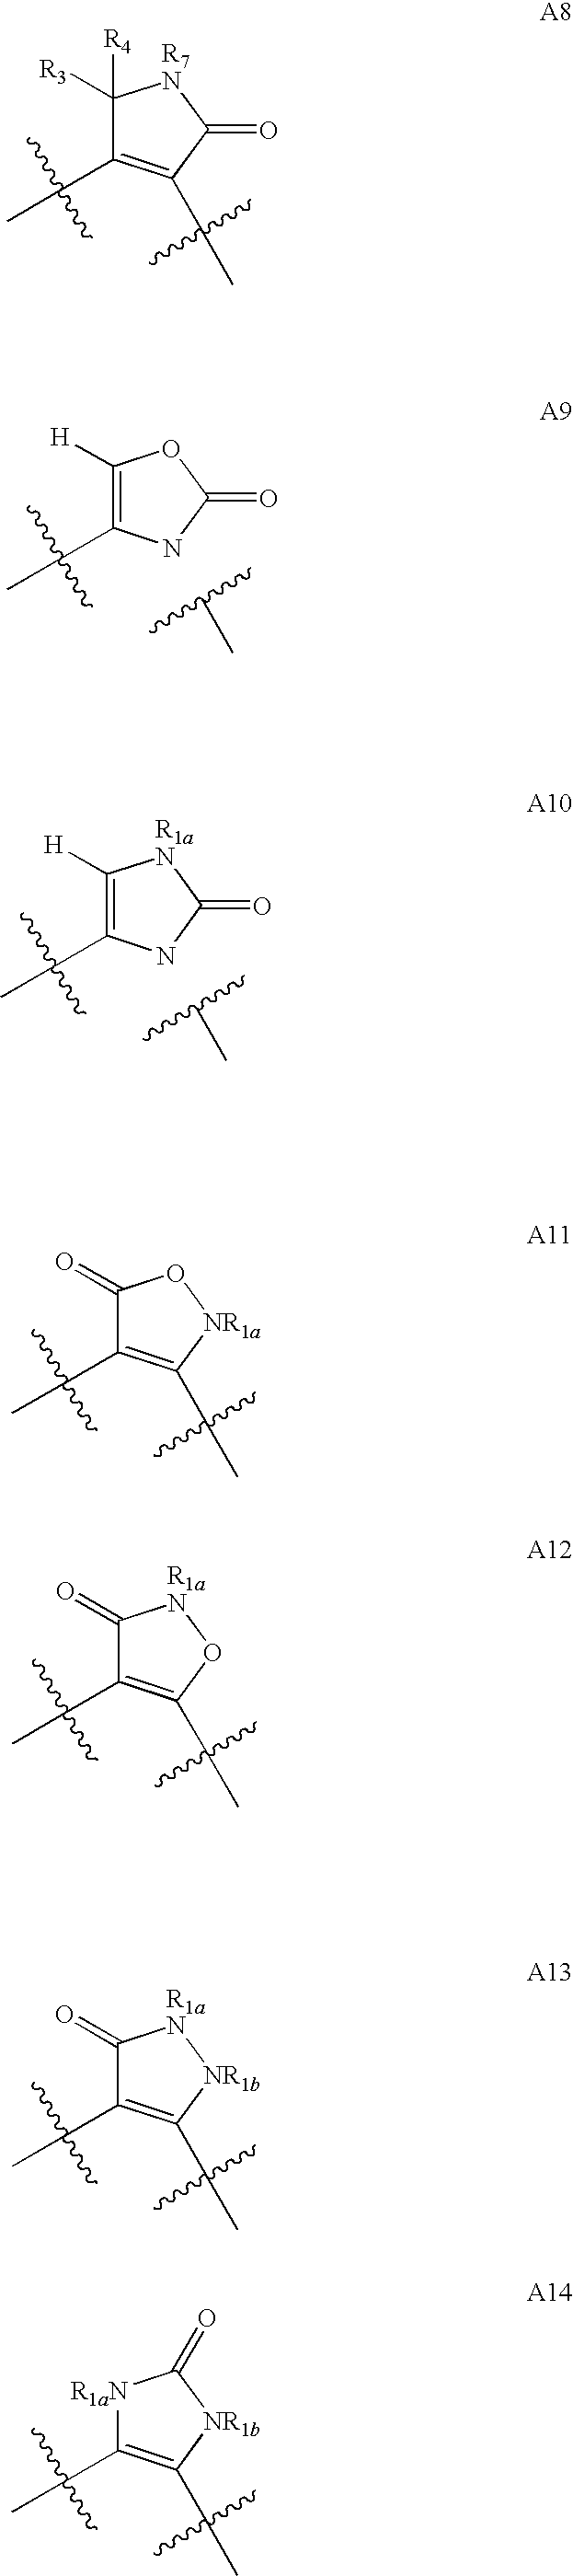 1,2-Disubstituted Heterocyclic Compounds